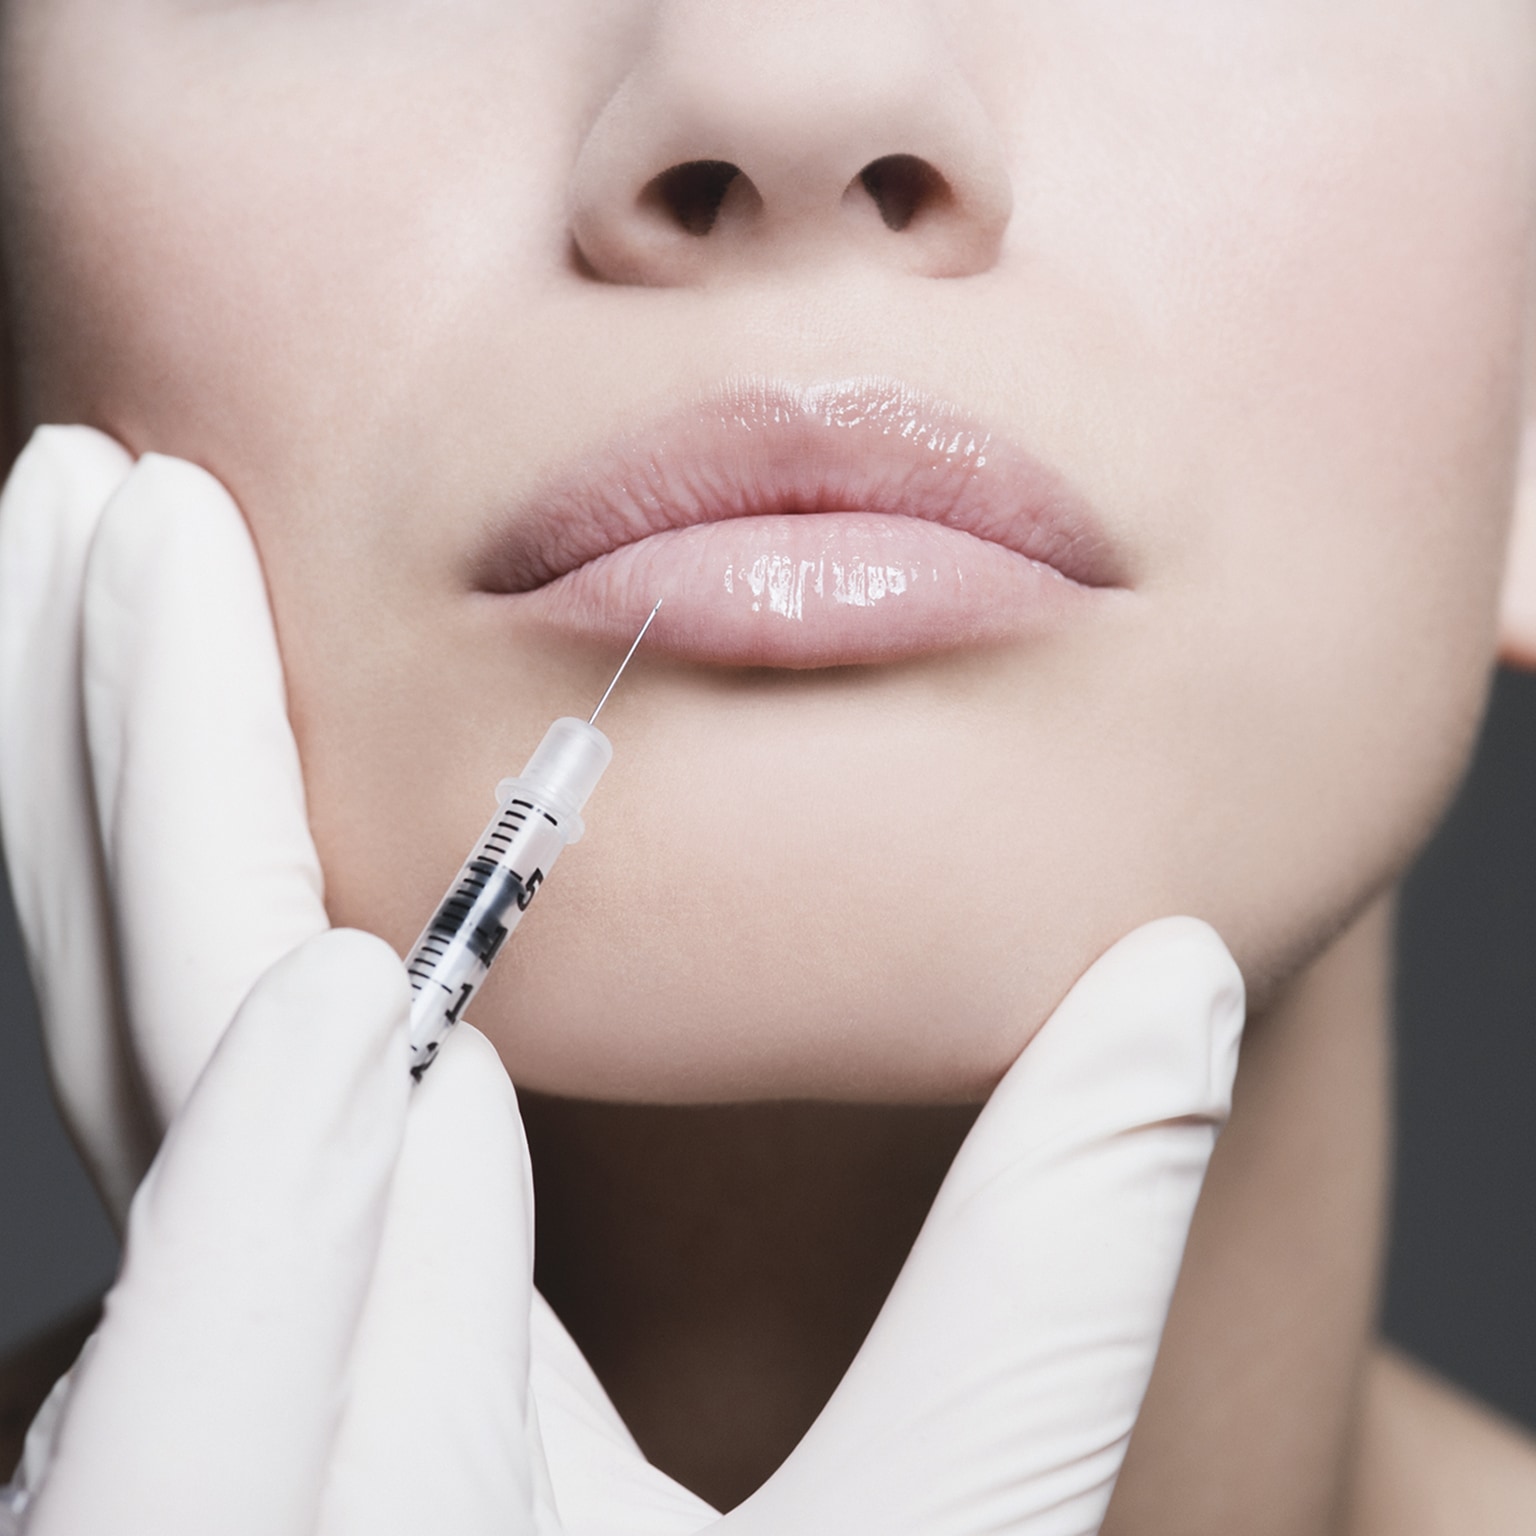 From extreme to mainstream: The future of aesthetics injectables